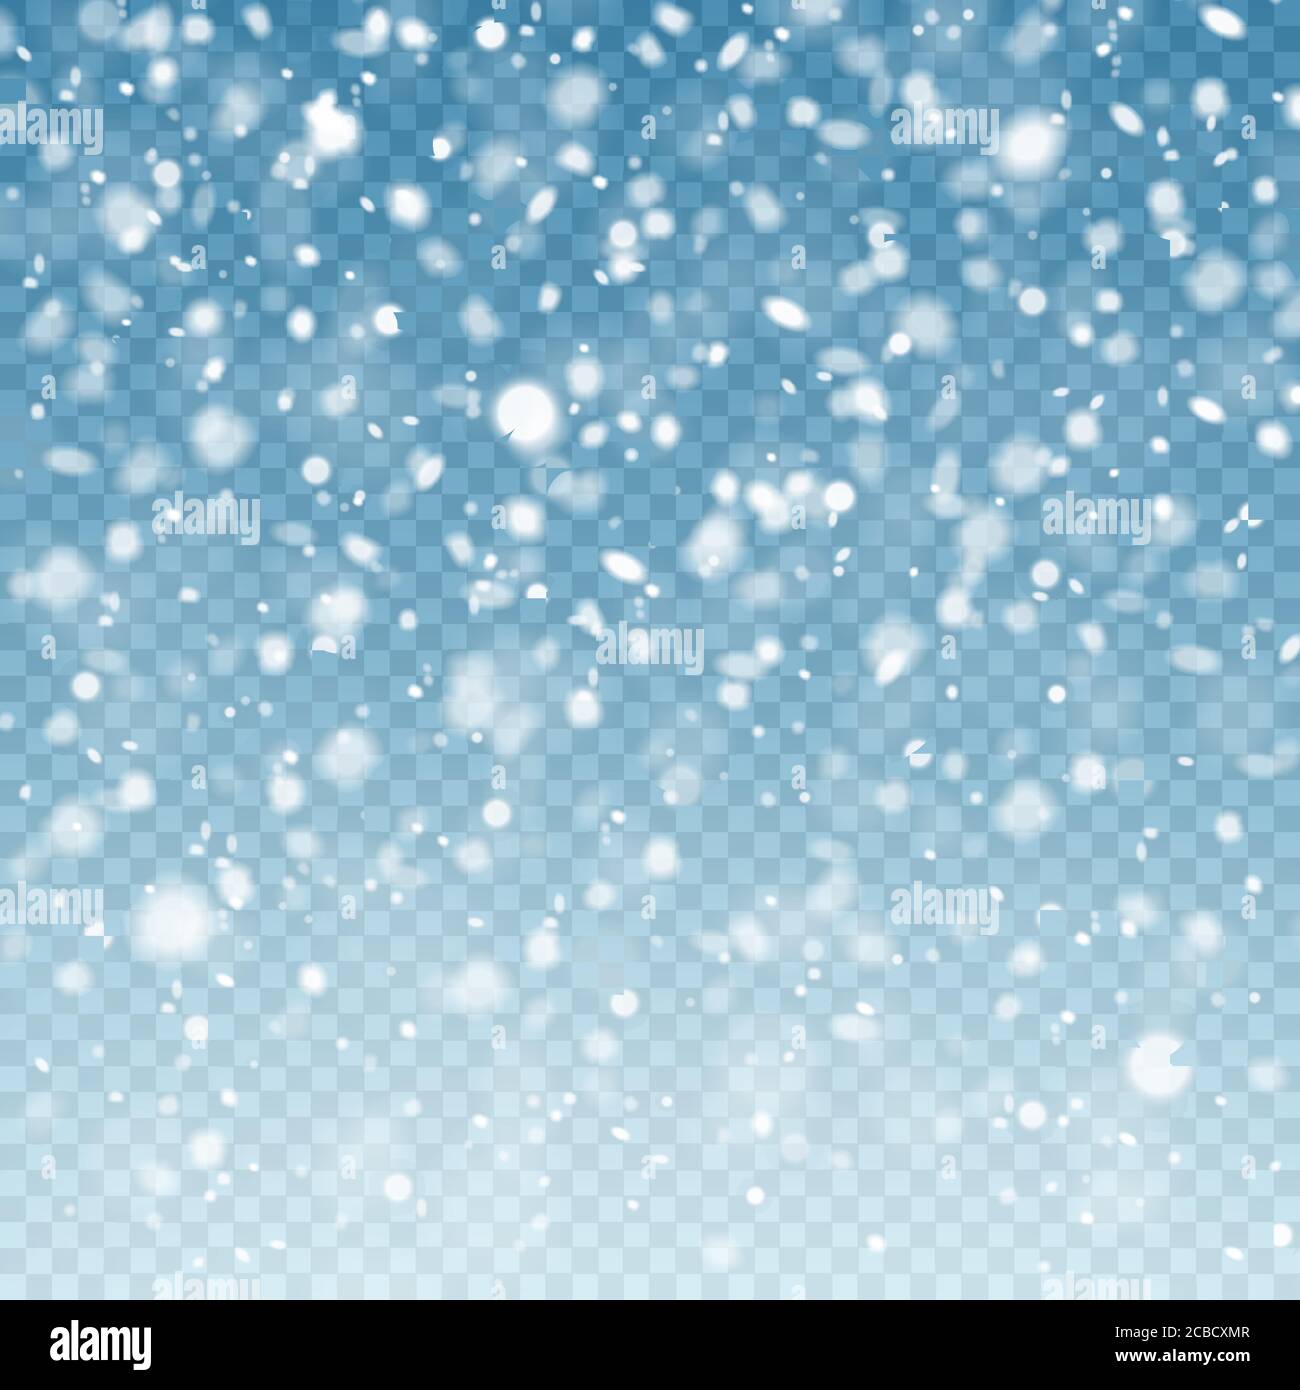 Realistic falling snow. Snow background. Frost storm, snowfall effect on blue transparent background. Christmas background. Vector illustration. Stock Vector